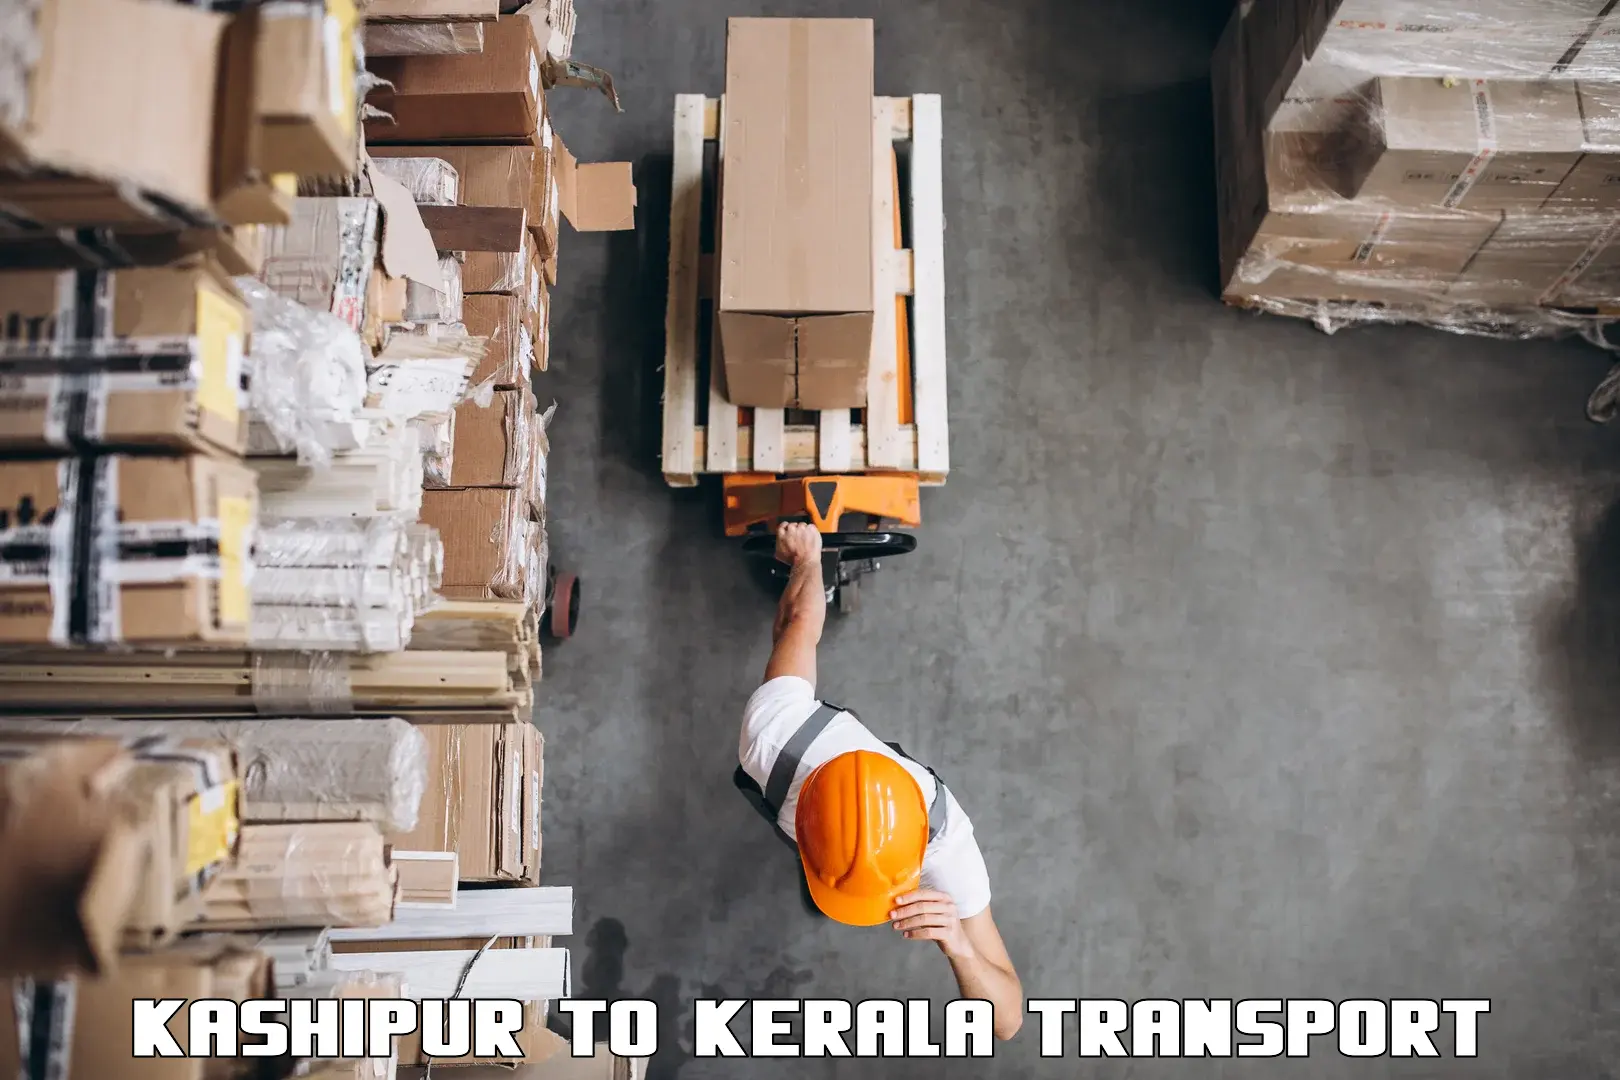 Container transport service Kashipur to Kerala